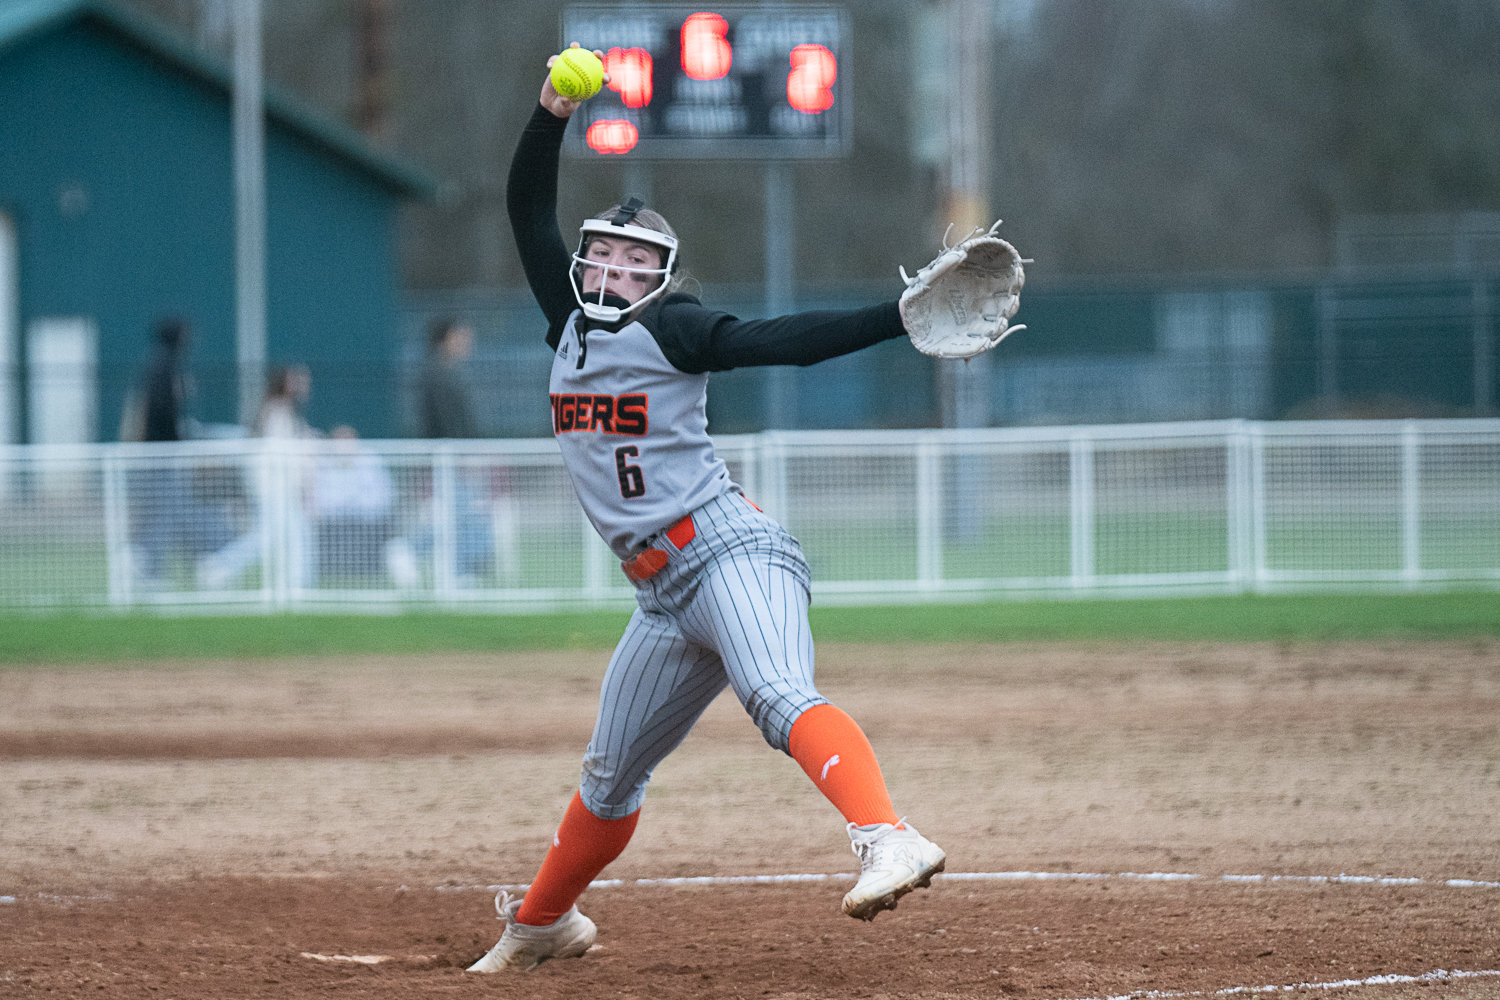 Hollynn Wakefield throws a pitch during Centralia's 5-3 win over Chehalis on March 28.